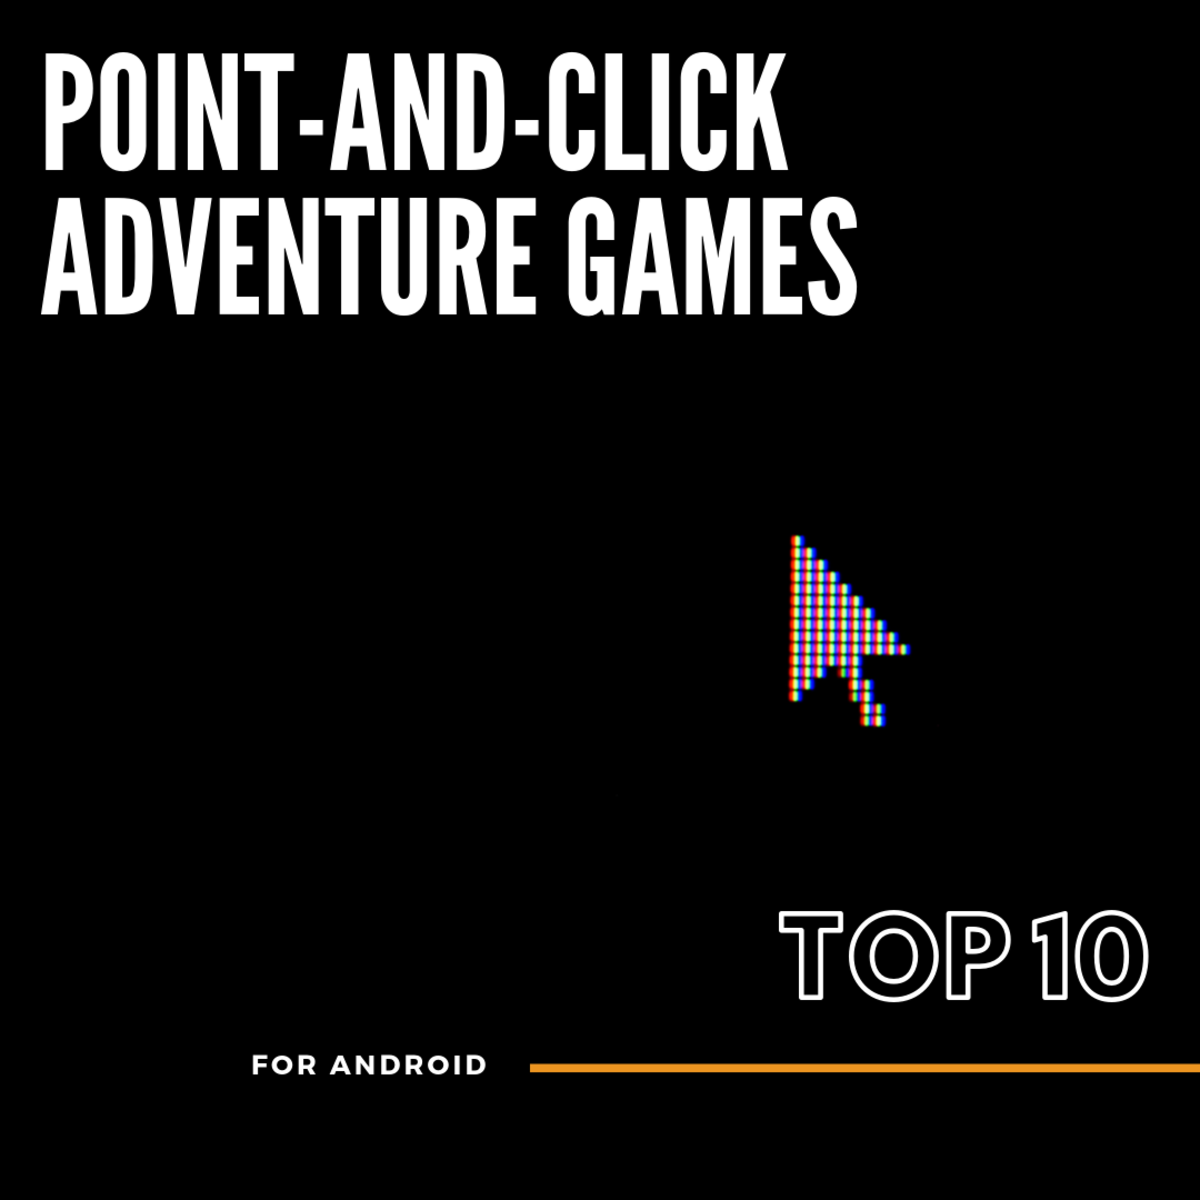 The 10 Best Point-and-Click Adventure Games for Android